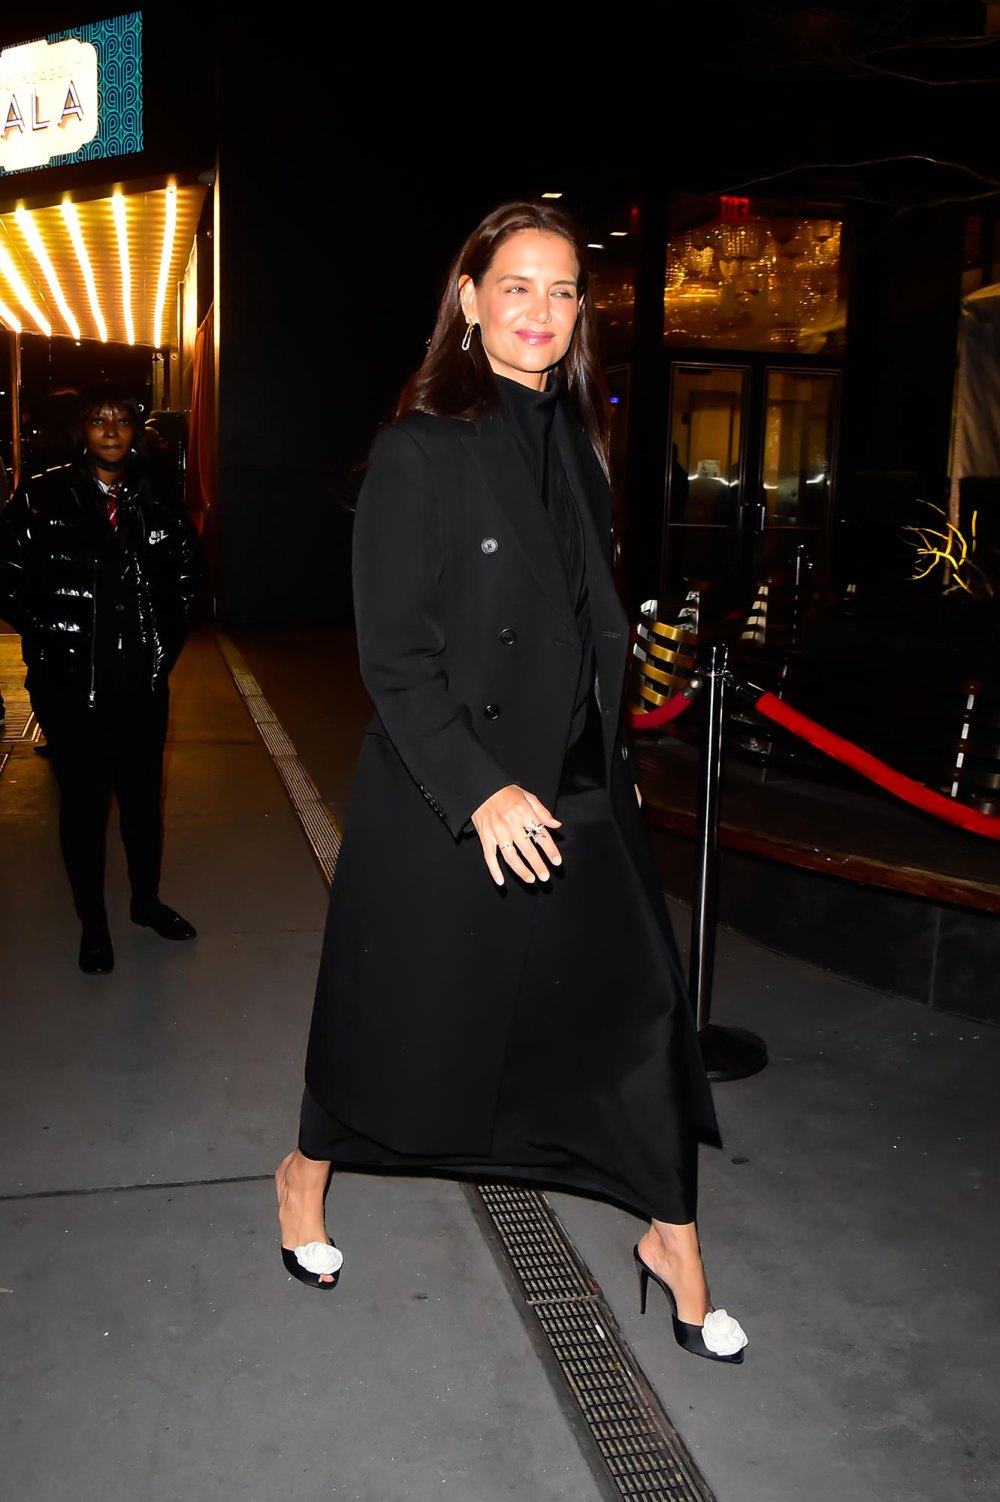 Katie Holmes personifies elegance in black floor-length dress at Roundabout Theater Company Gala